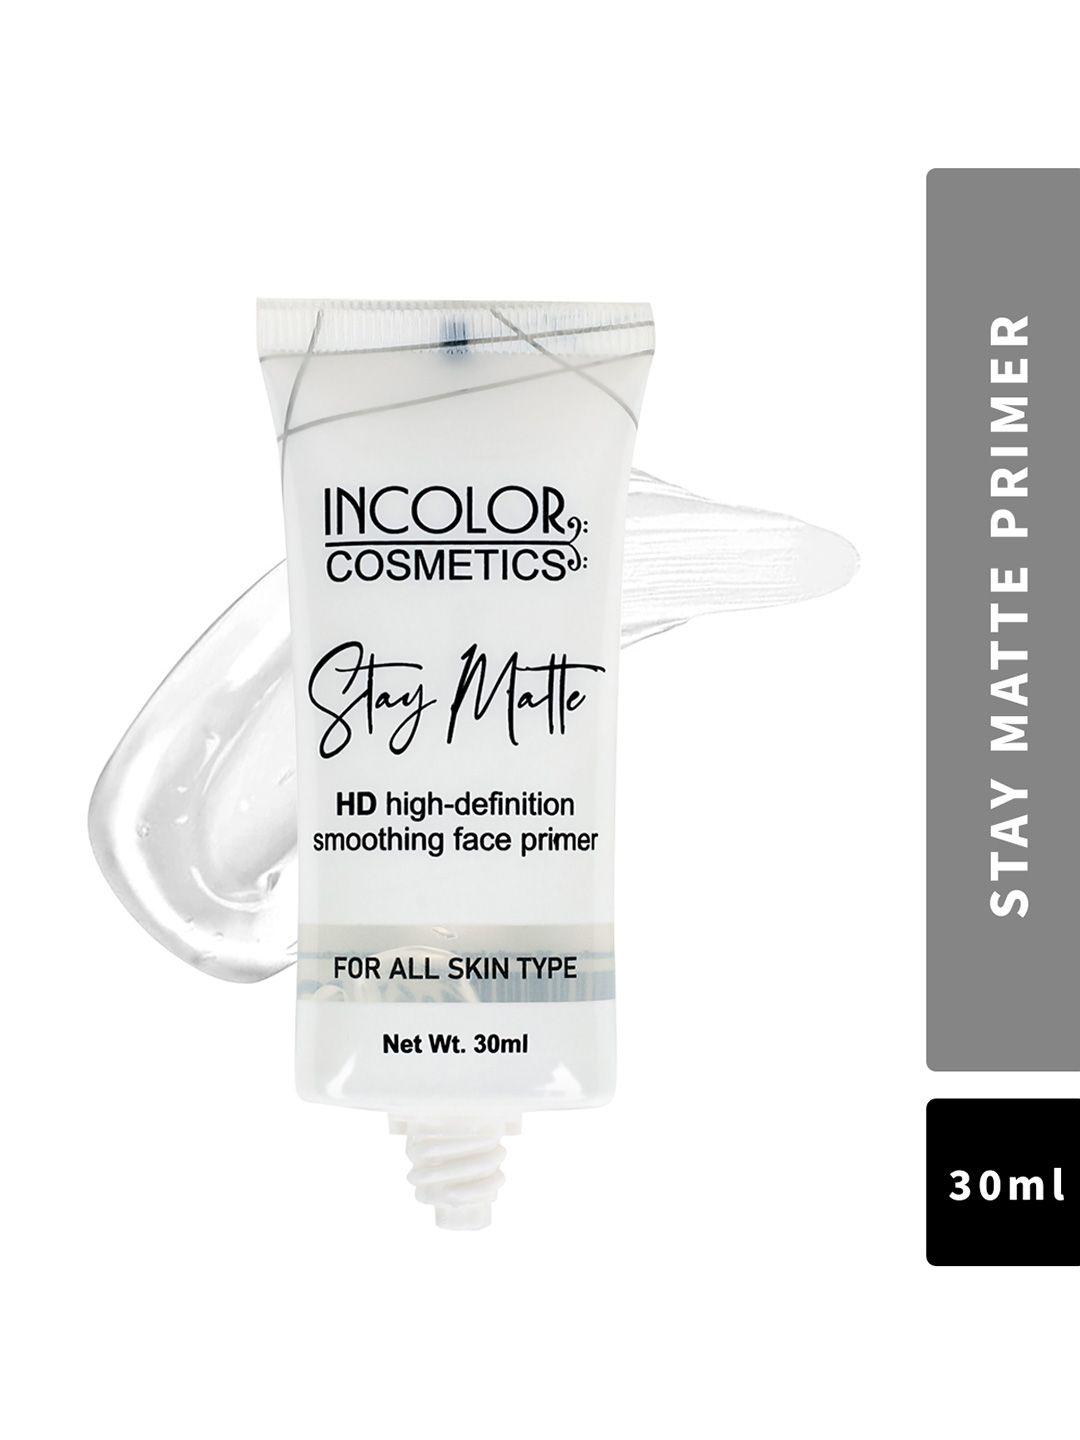 incolor-stay-matte-hd-smoothening-face-primer-for-all-skin-type---30-ml